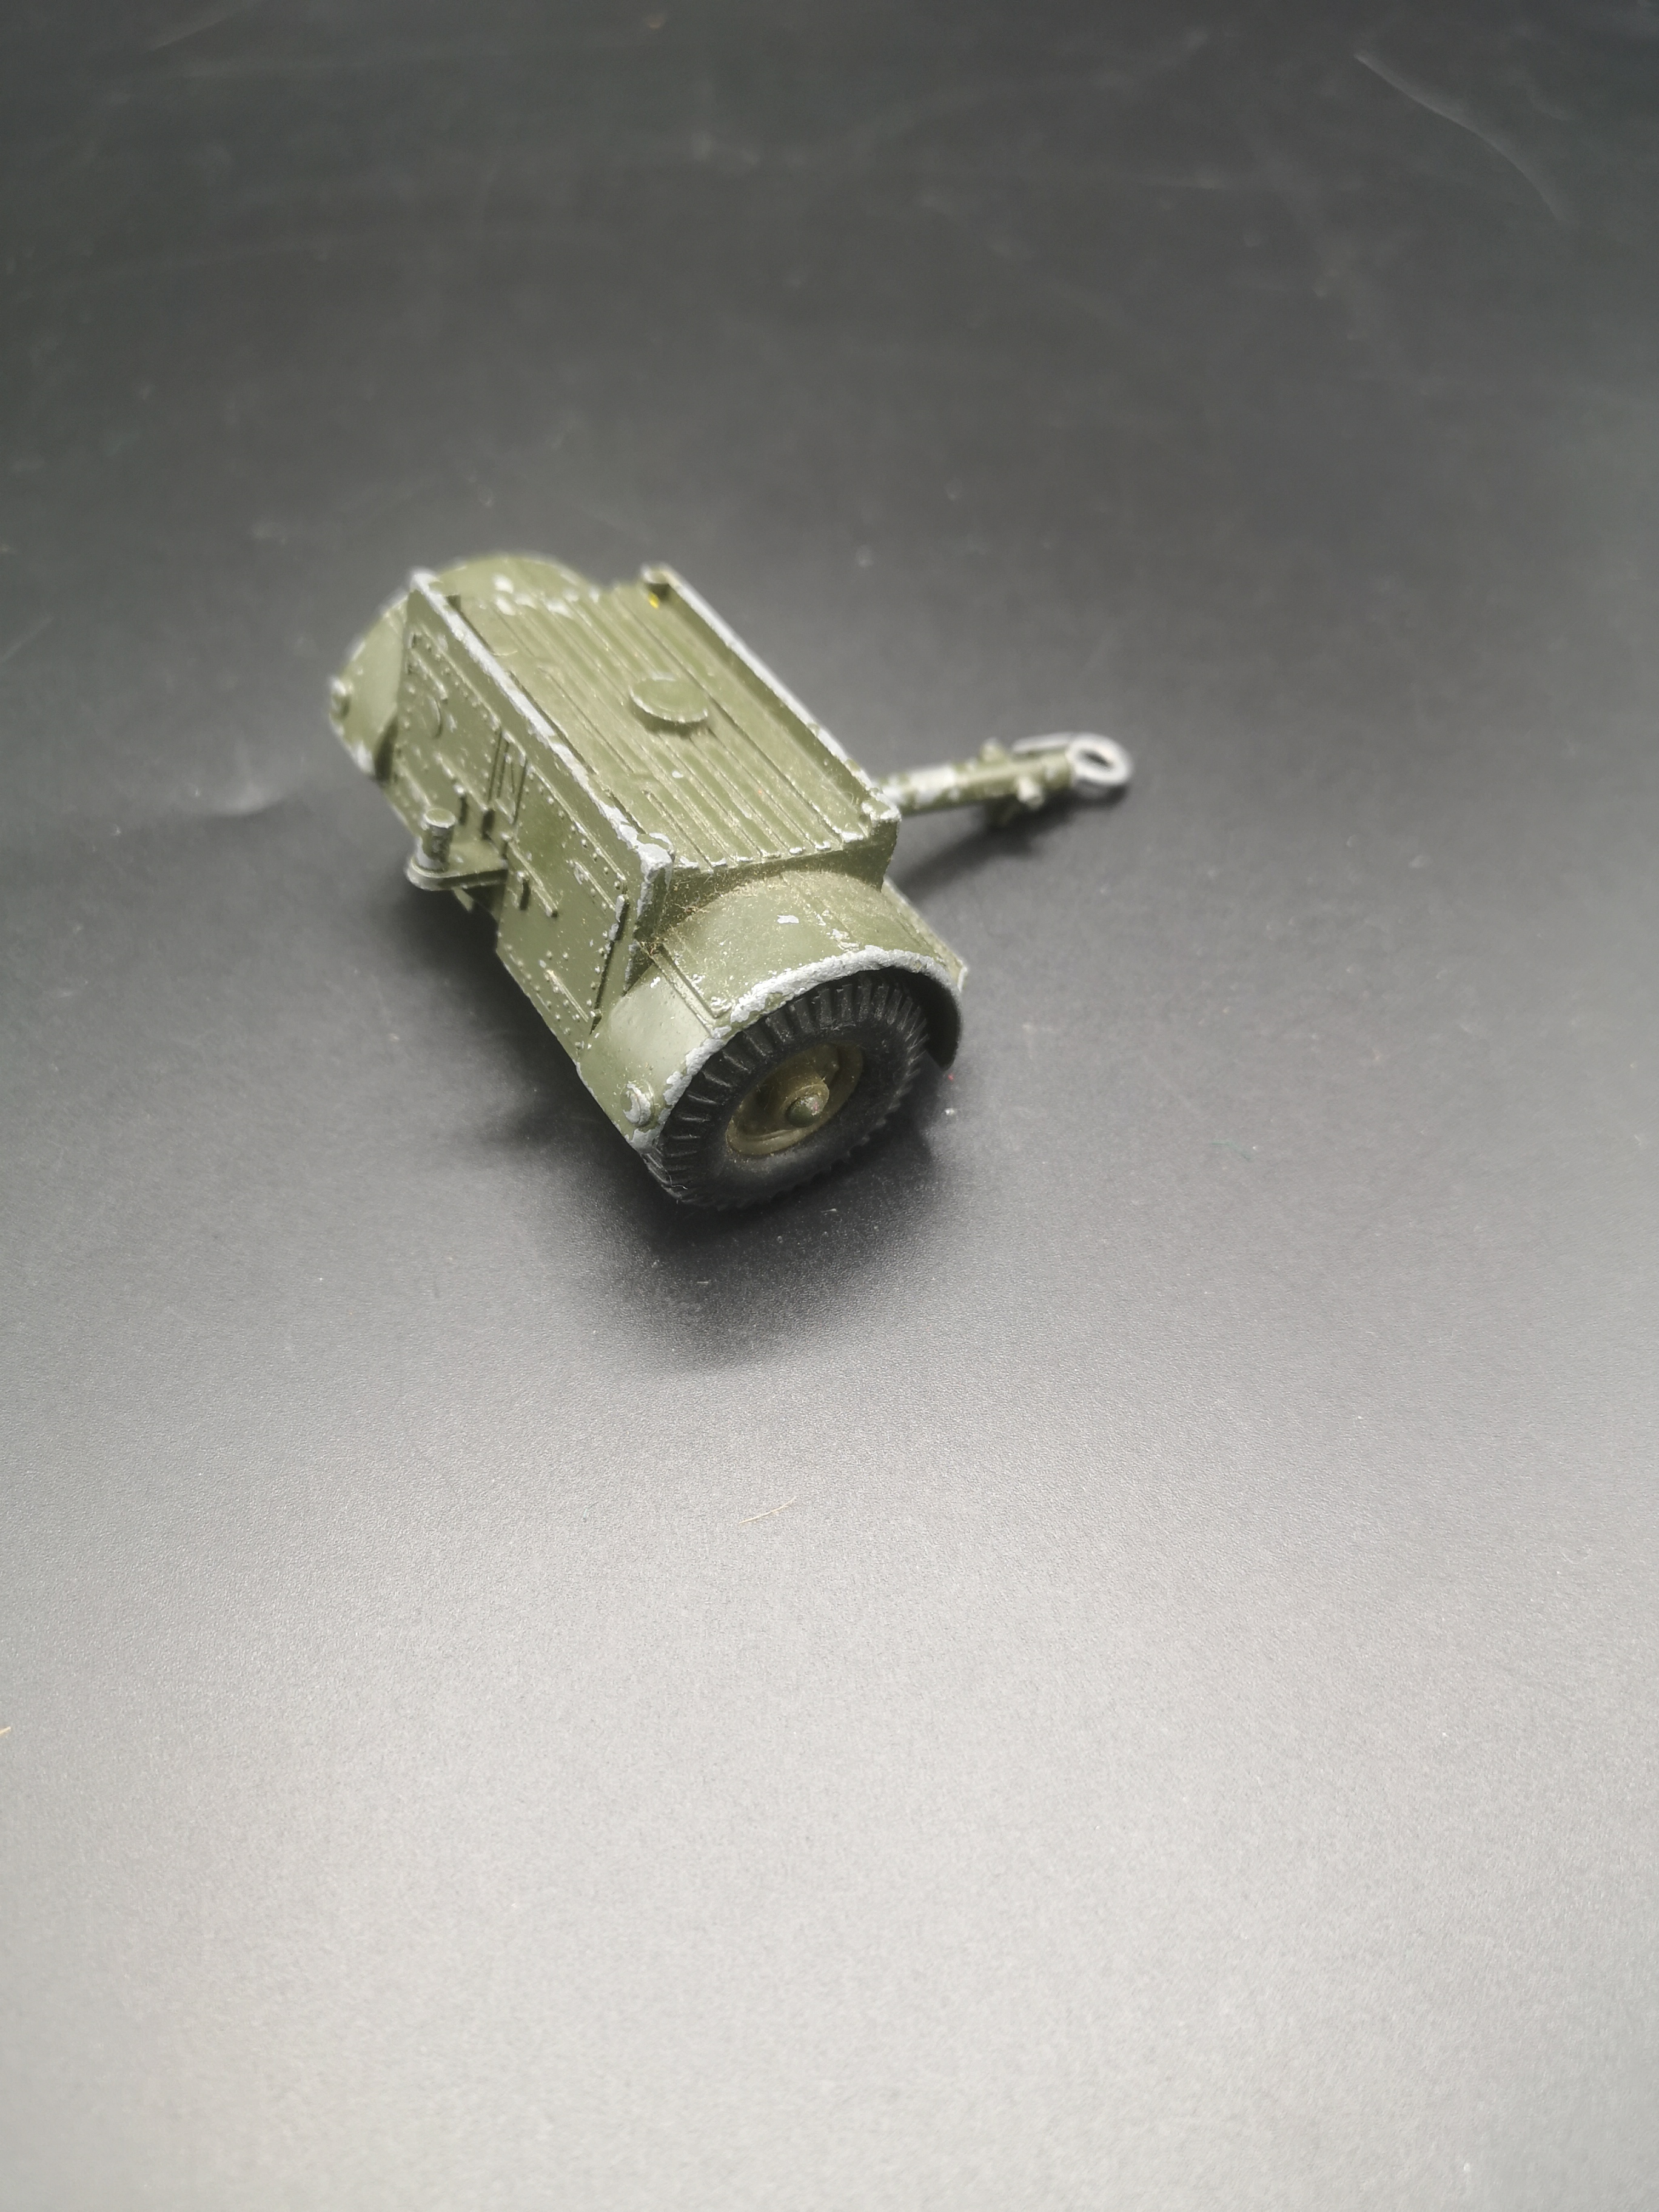 A Crescent diecast model tank together with a Dinky die-cast model missile launcher - Image 6 of 8